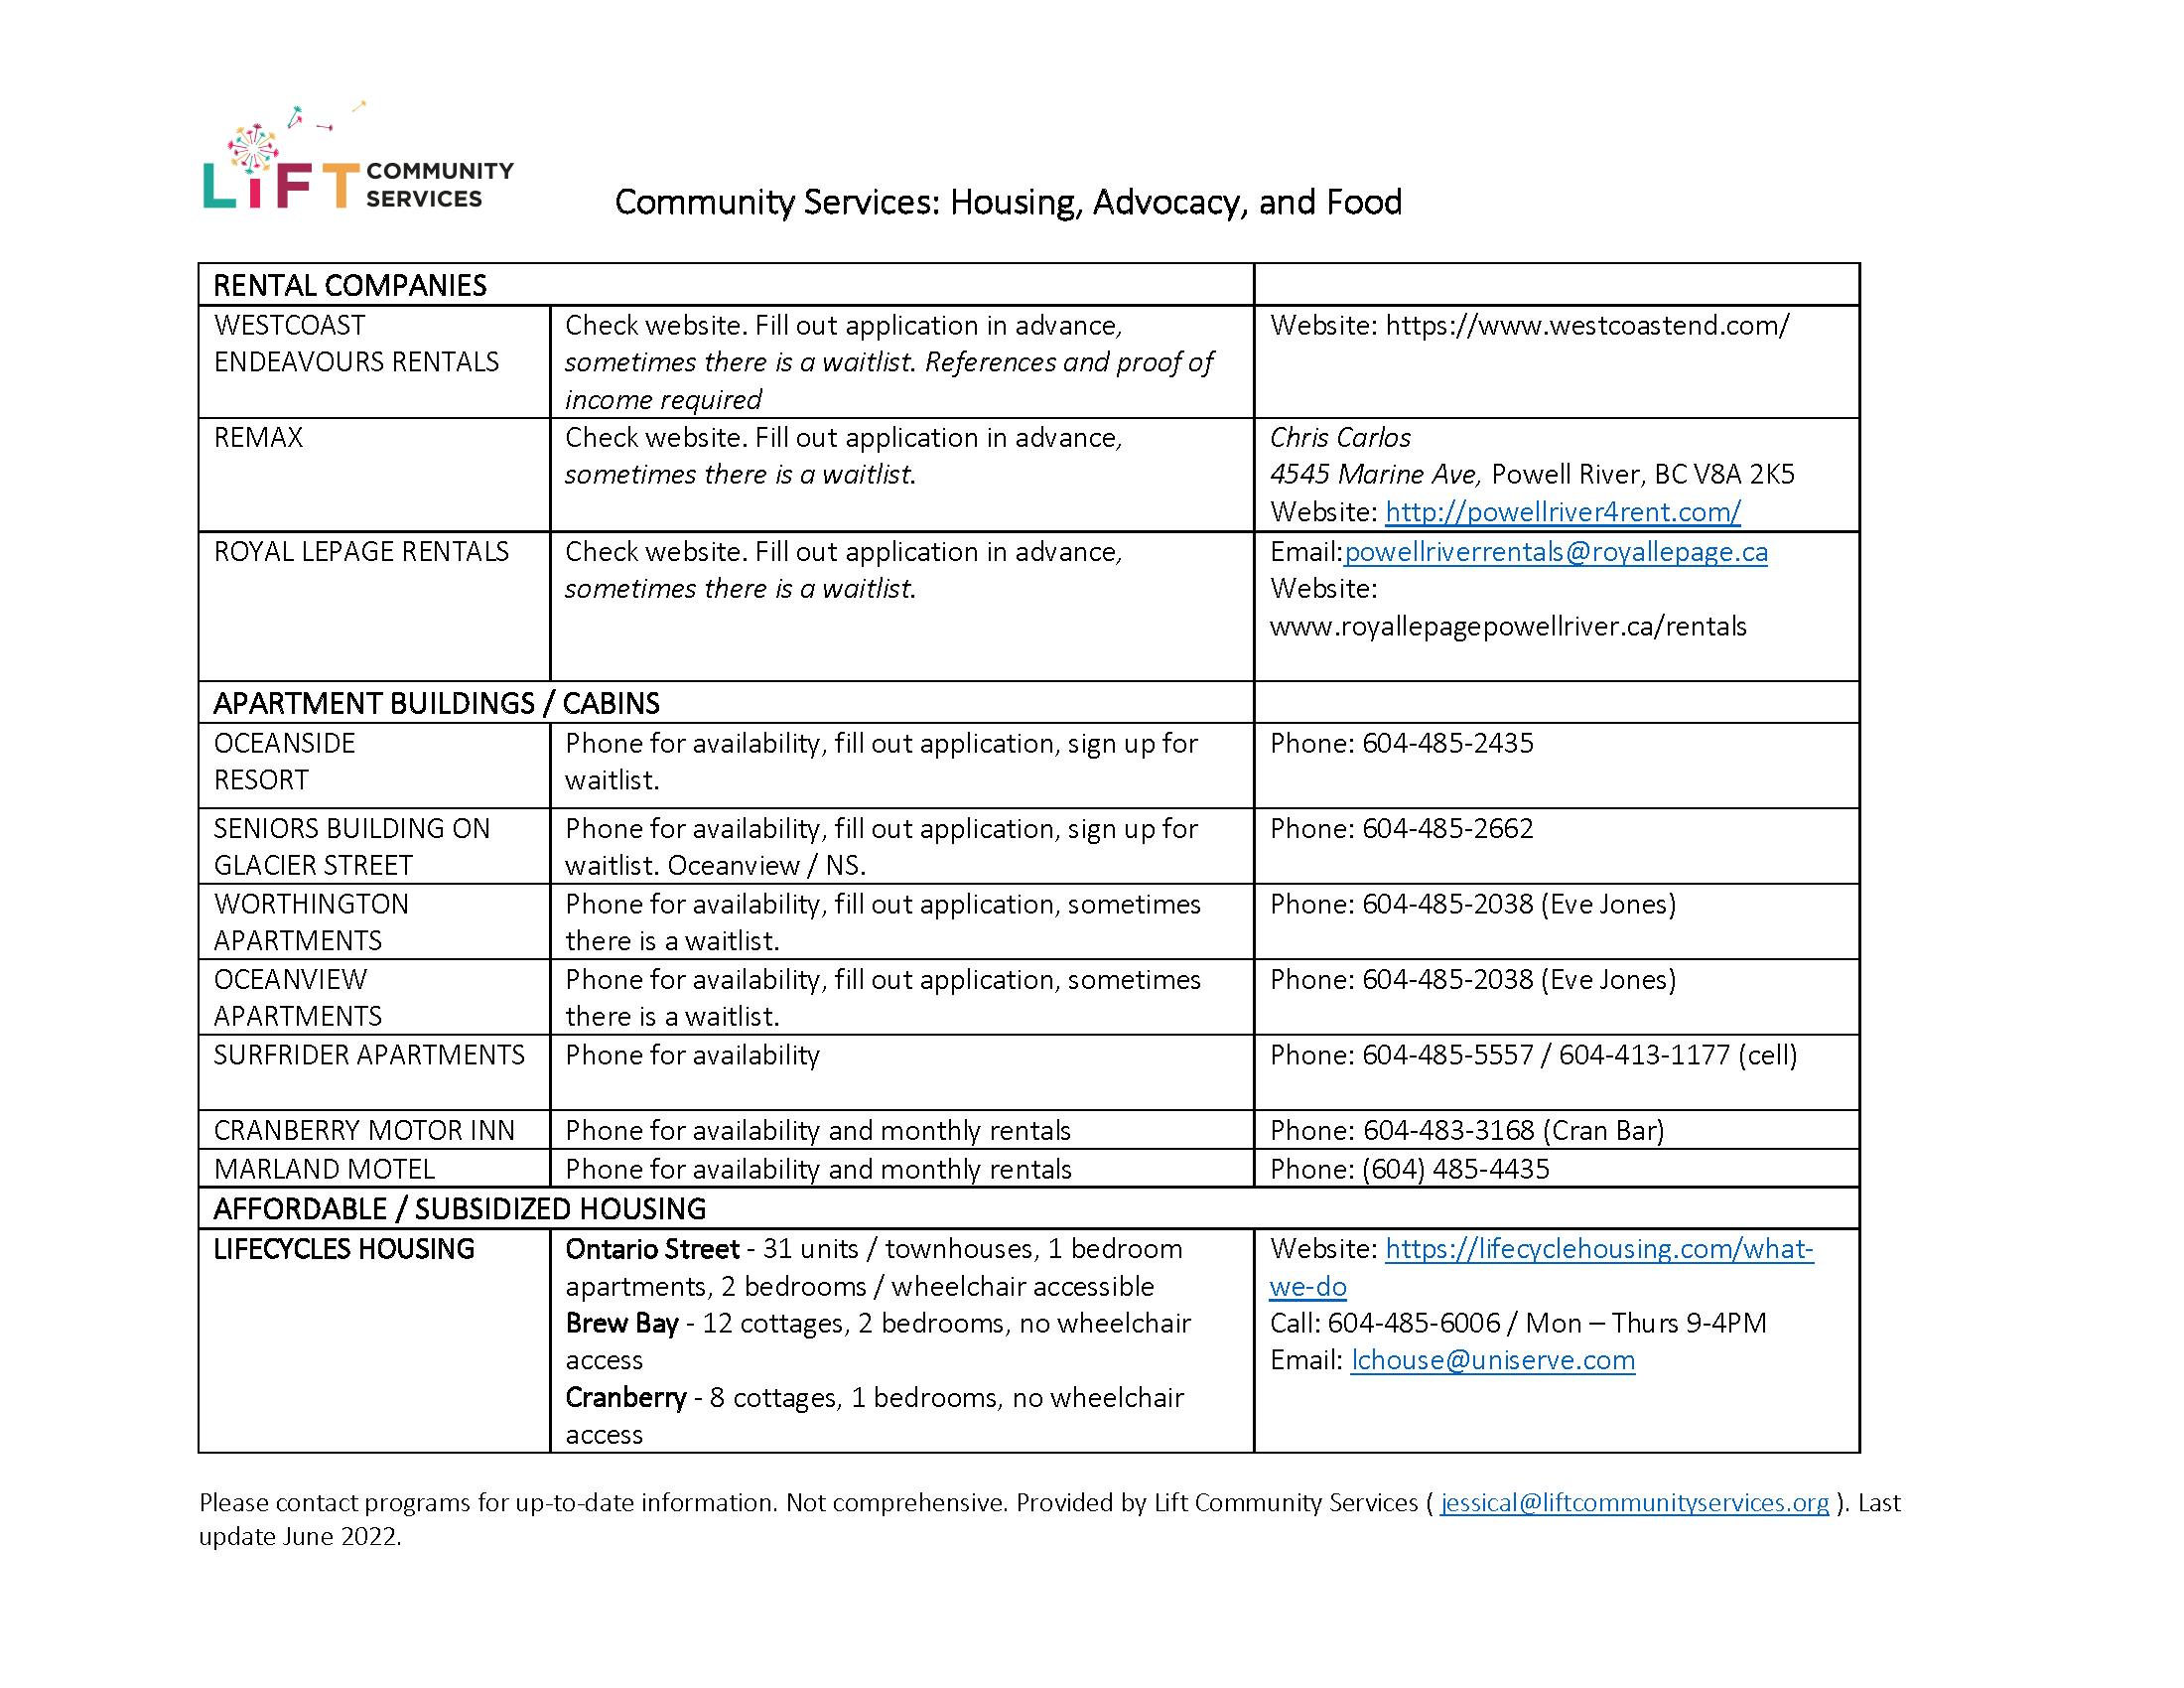 JUNE 2022 Community Resources List_Page_3.png